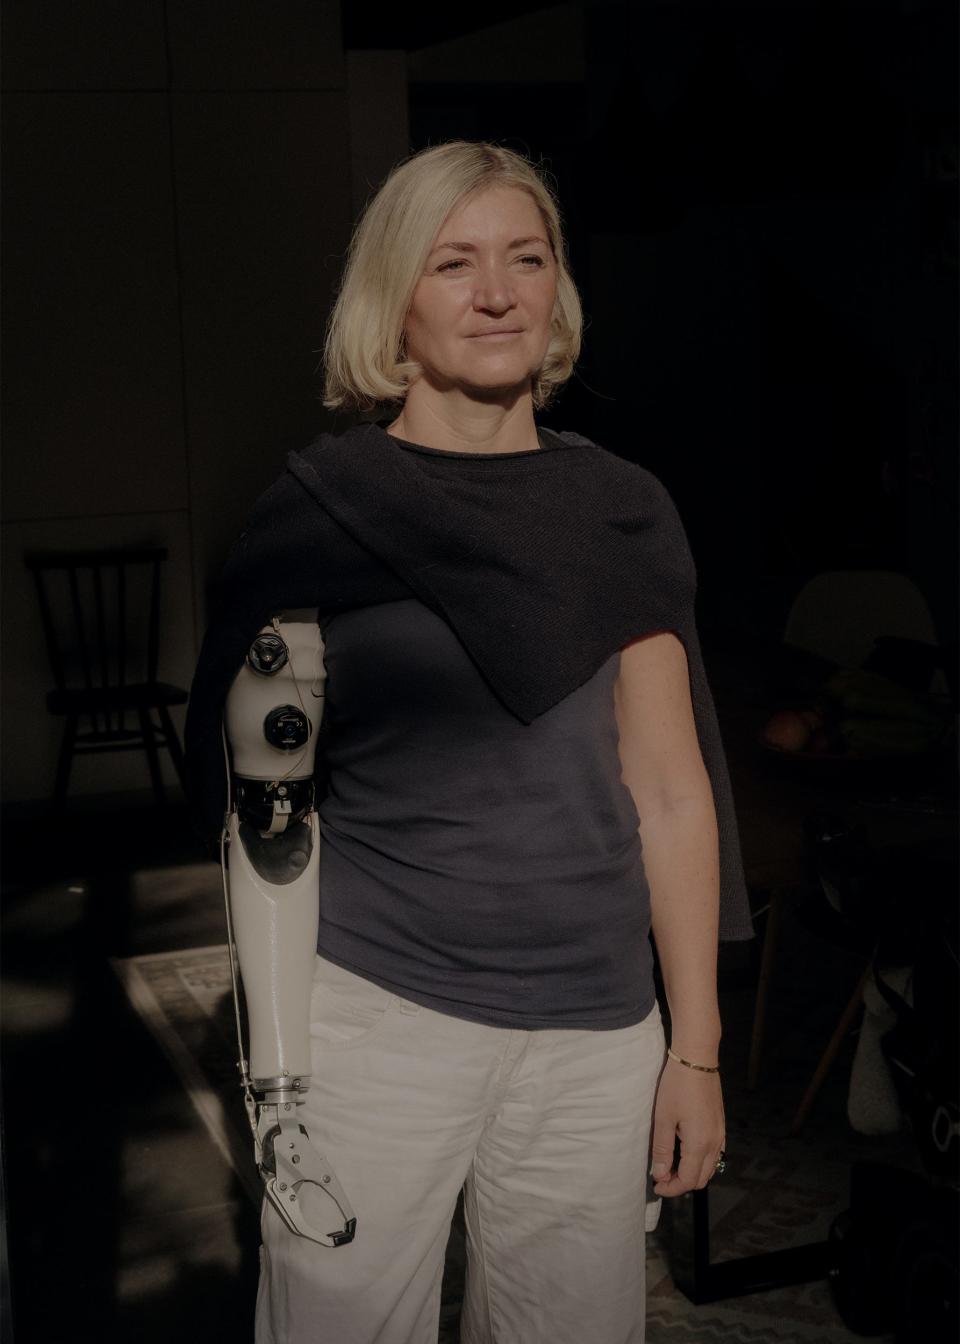 Sarah de Lagarde had an arm and a leg amputated after two London Underground trains hit her in September 2022.